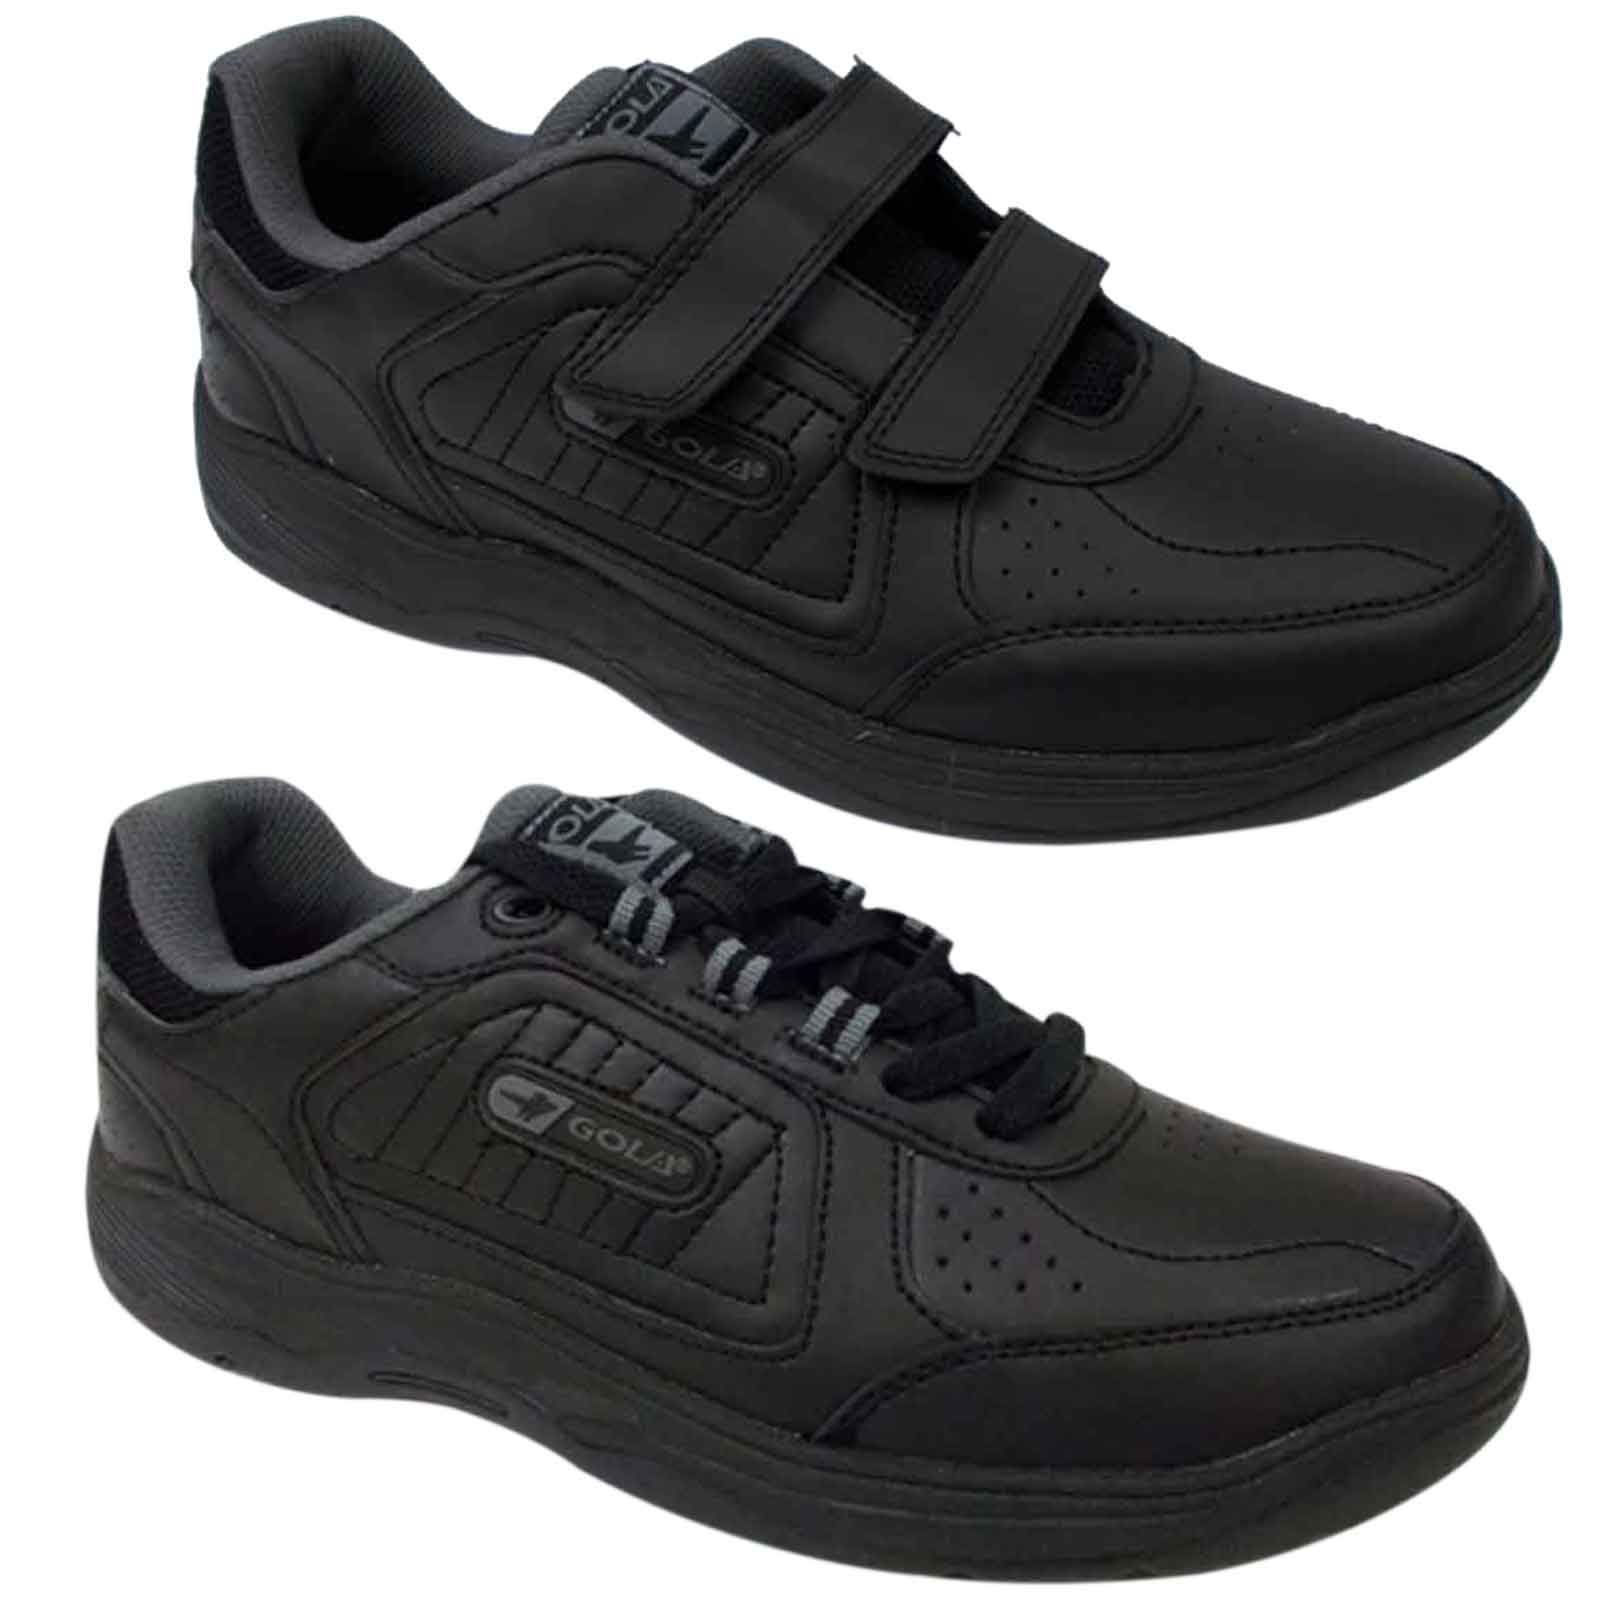 gola mens wide fit trainers